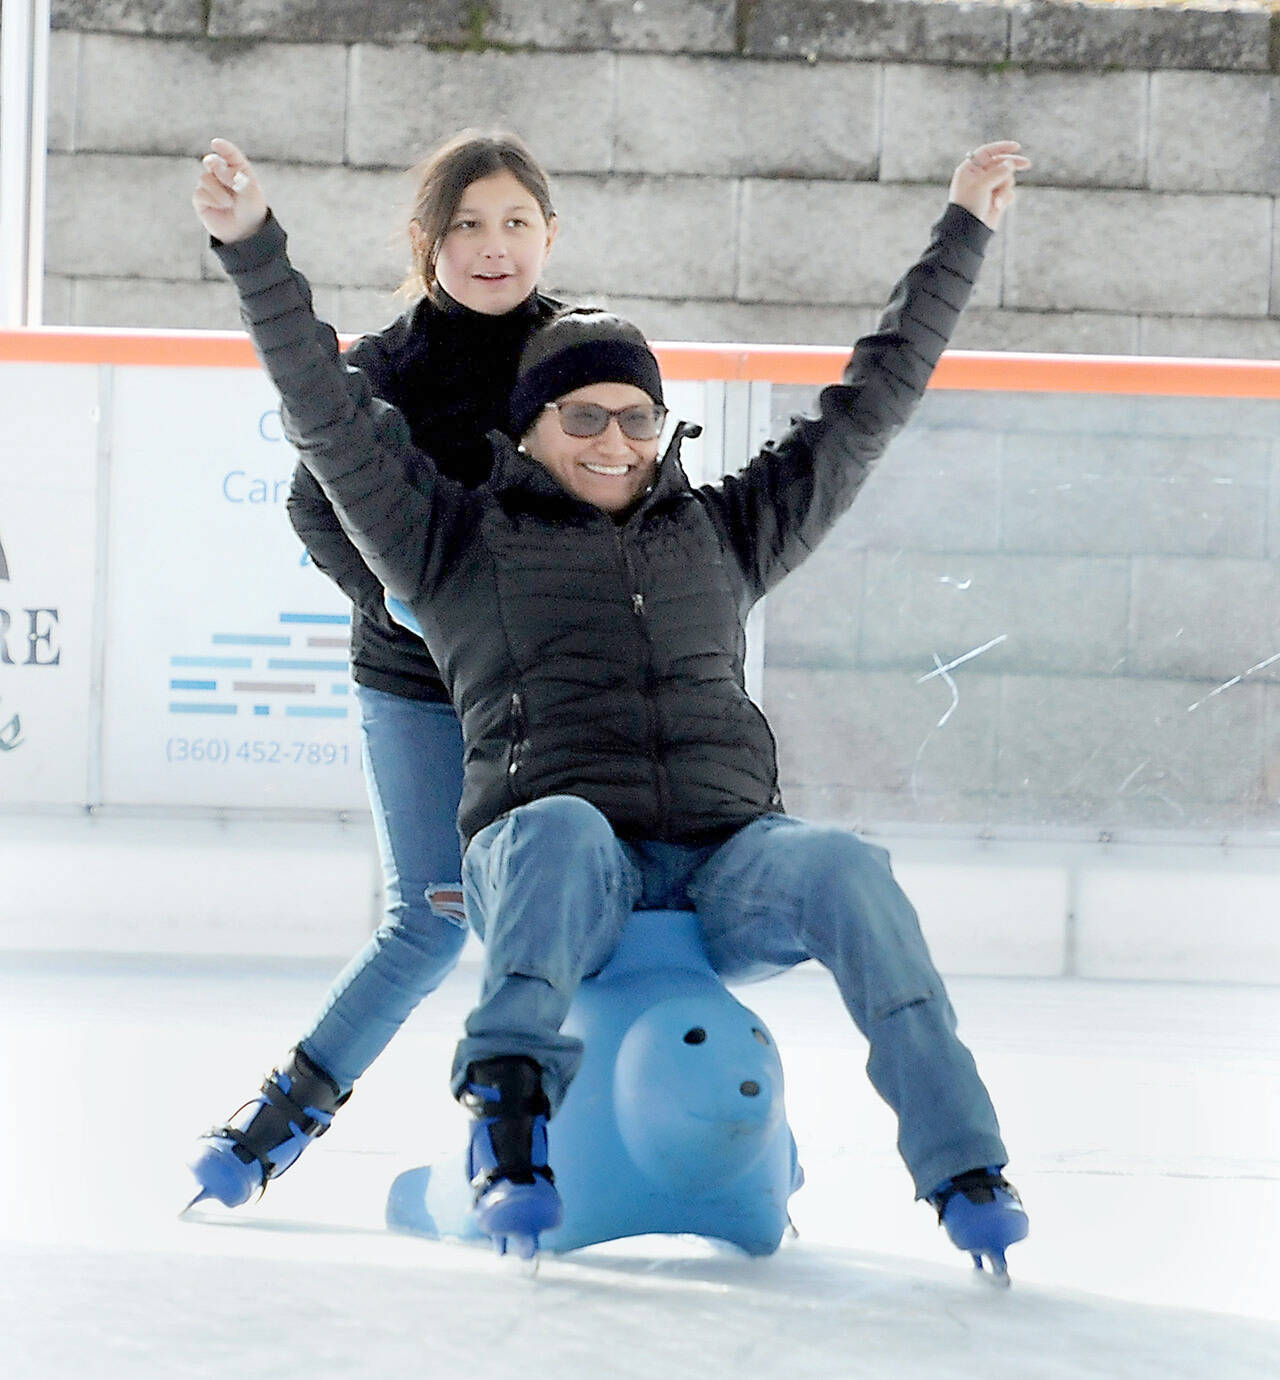 Sharmaine Wright of Port Angeles expresses delight while being pushed by her daughter, Kaylee Konopaski, 10, on the ice at the Port Angeles Winter Ice Village on Saturday. The village, which features a temporary ice skating rink, opened Friday and will operate daily from noon to 9 p.m. through Jan. 2. (Keith Thorpe/Peninsula Daily News)